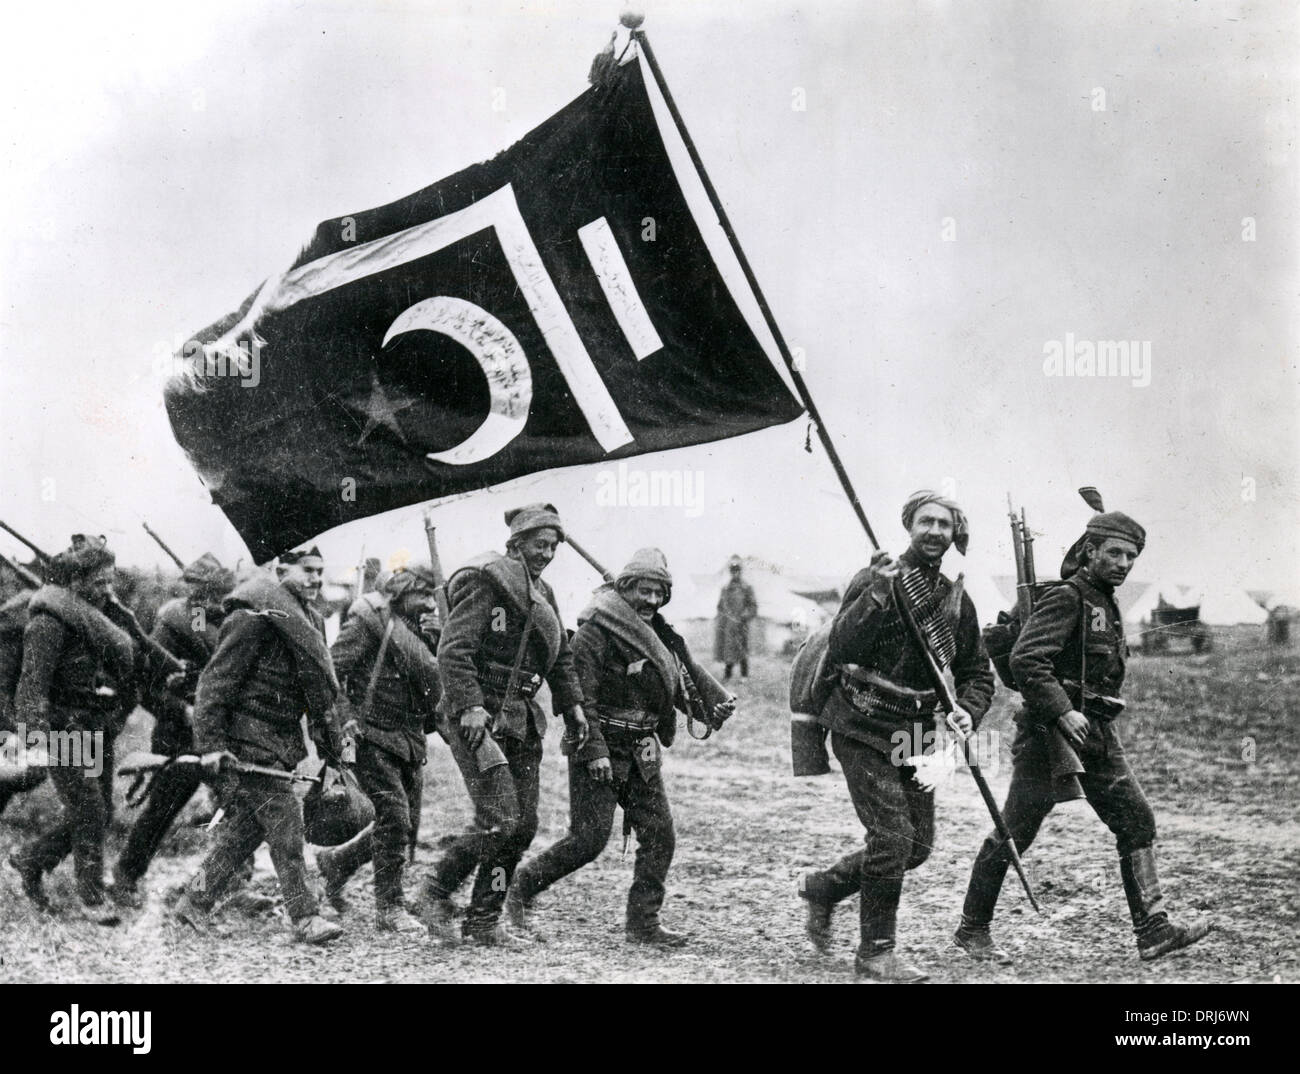 Turkish troops with flag, WW1 Stock Photo